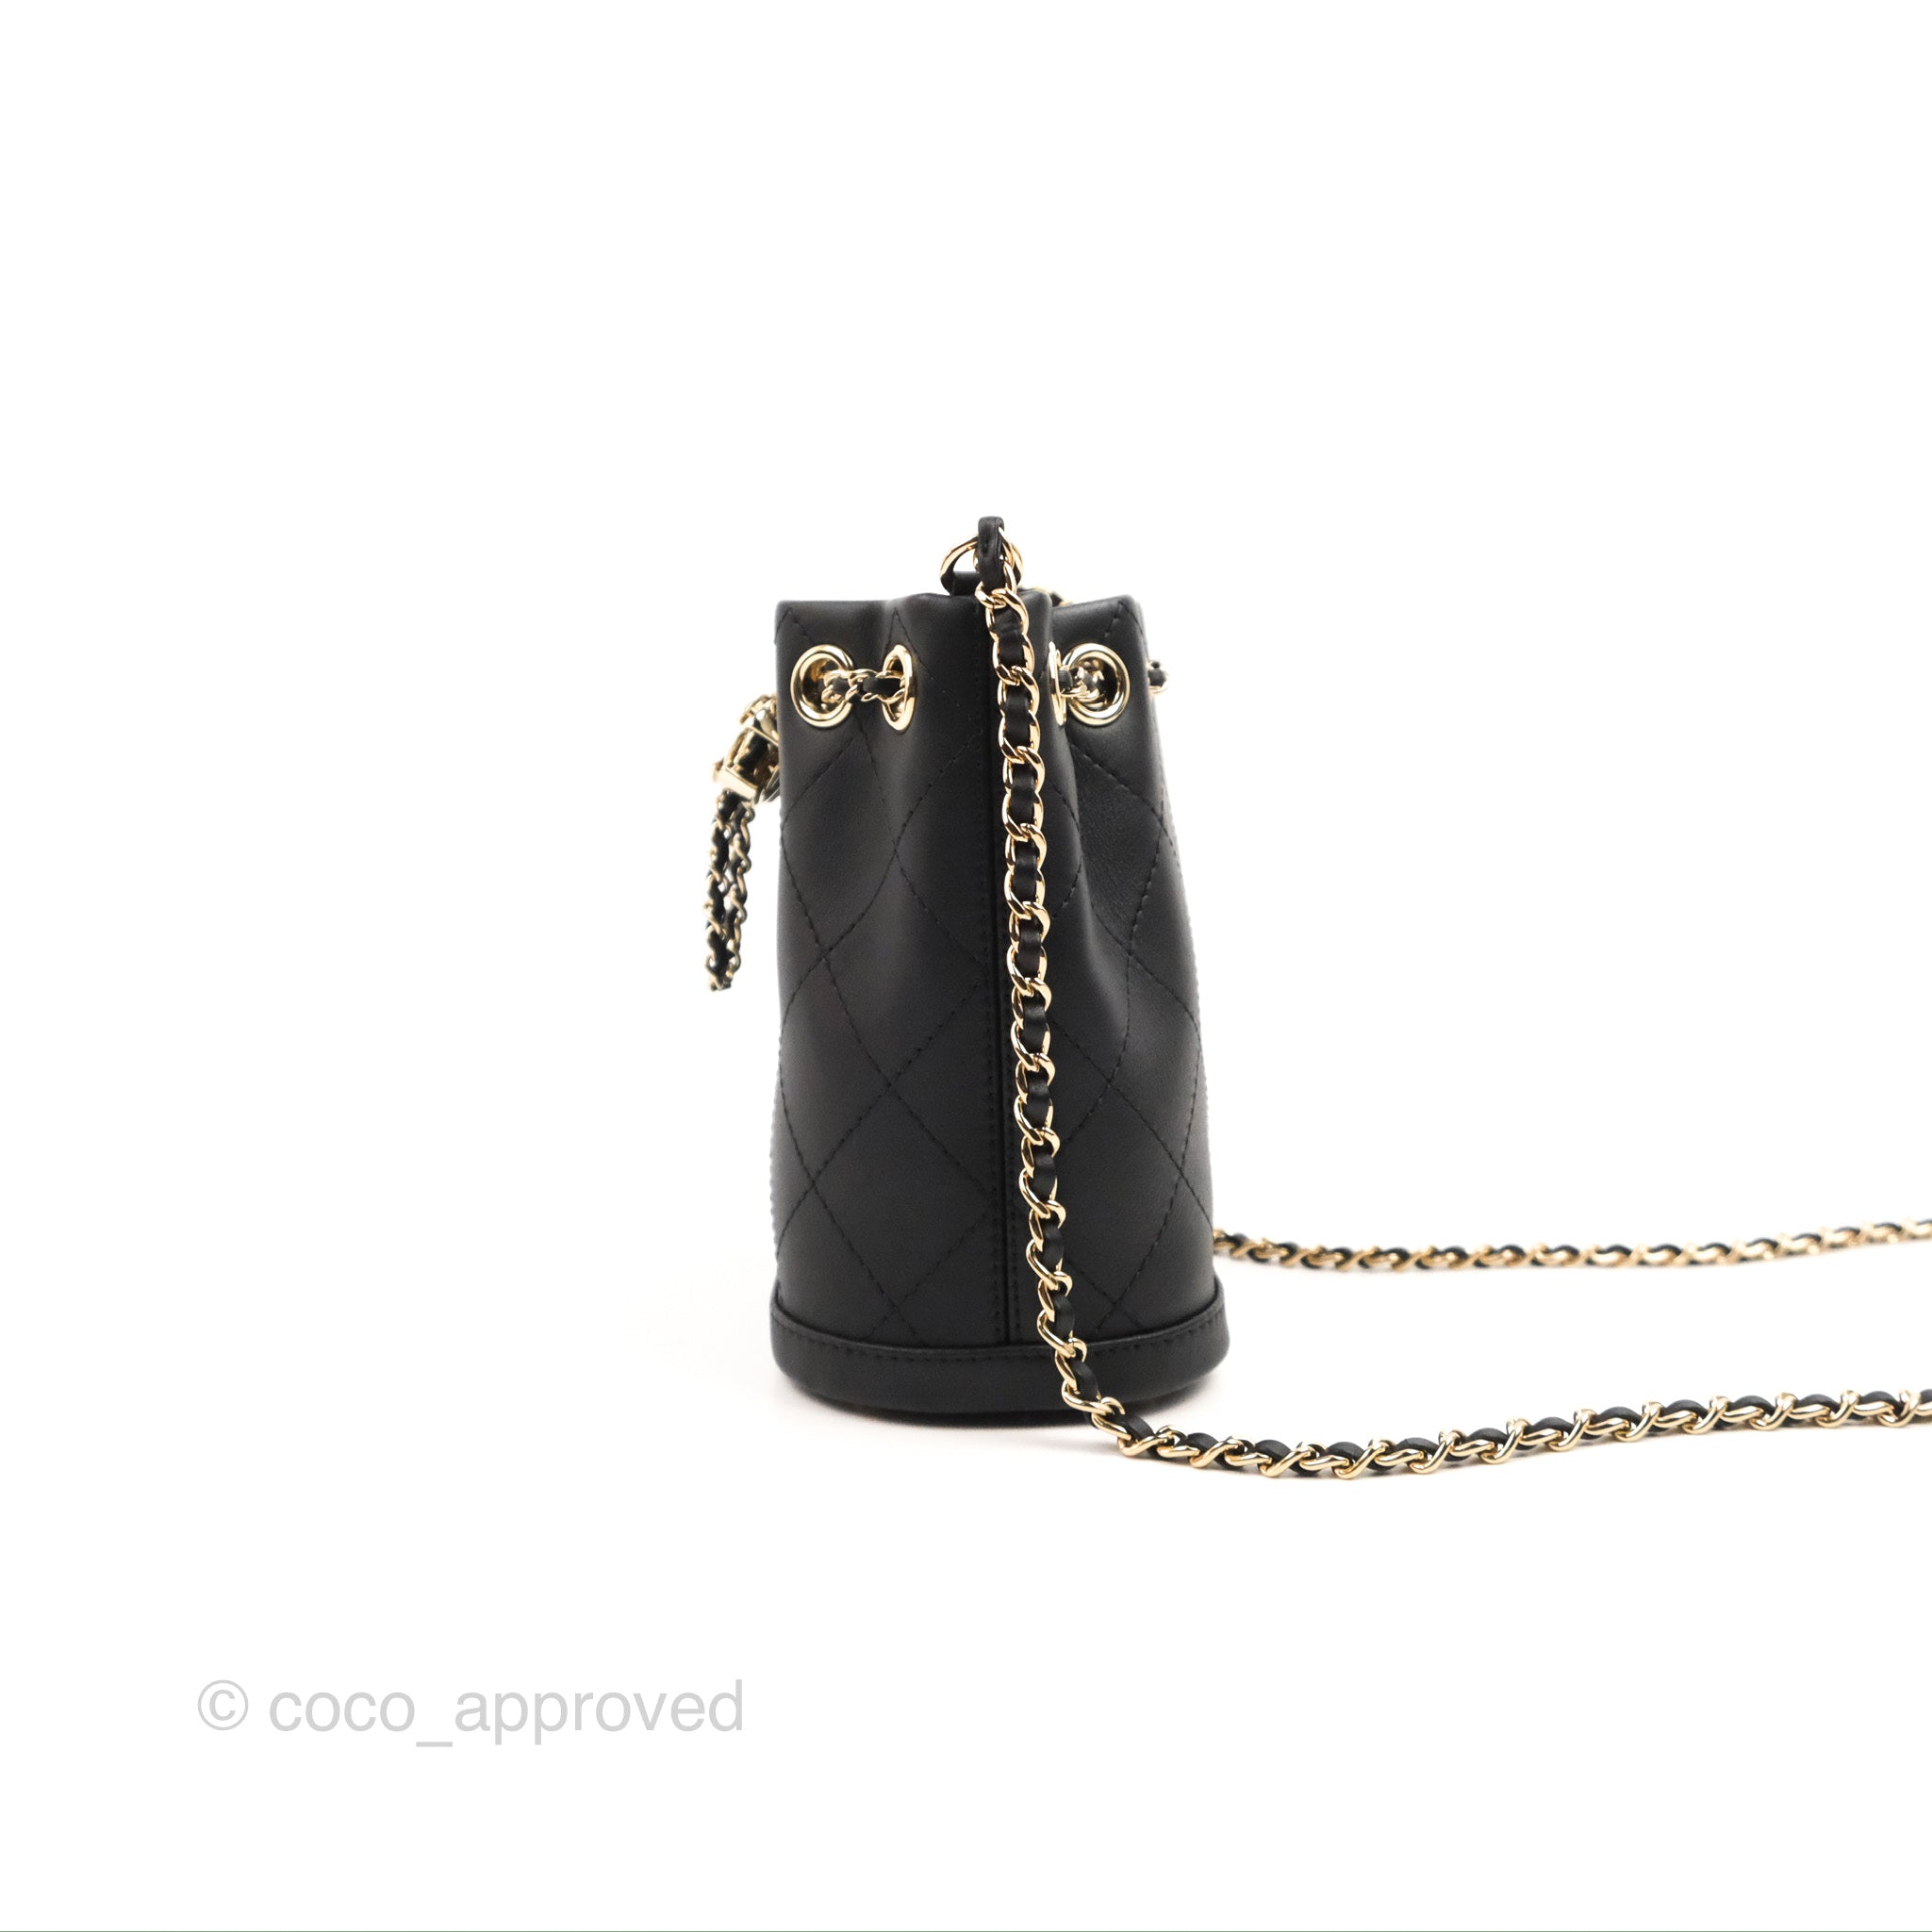 Chanel black bucket bag with logo on the front and gold detail